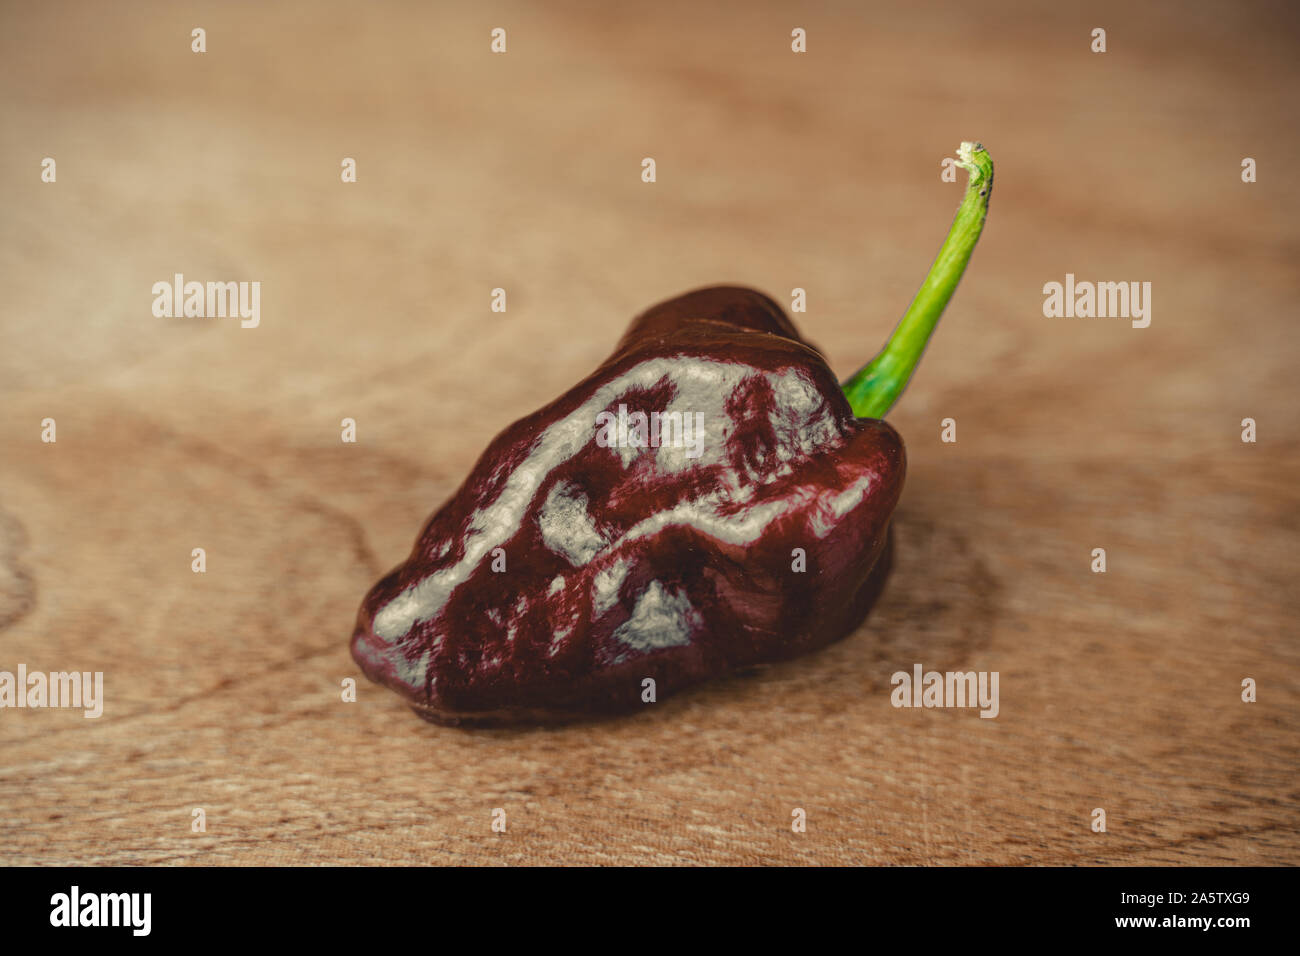 Photo of chocolate habanero pepper (Capsicum chinense) on a wooden table. Chocolate brown hot chili pepper. Tasty paprika, one of the hottest. Stock Photo